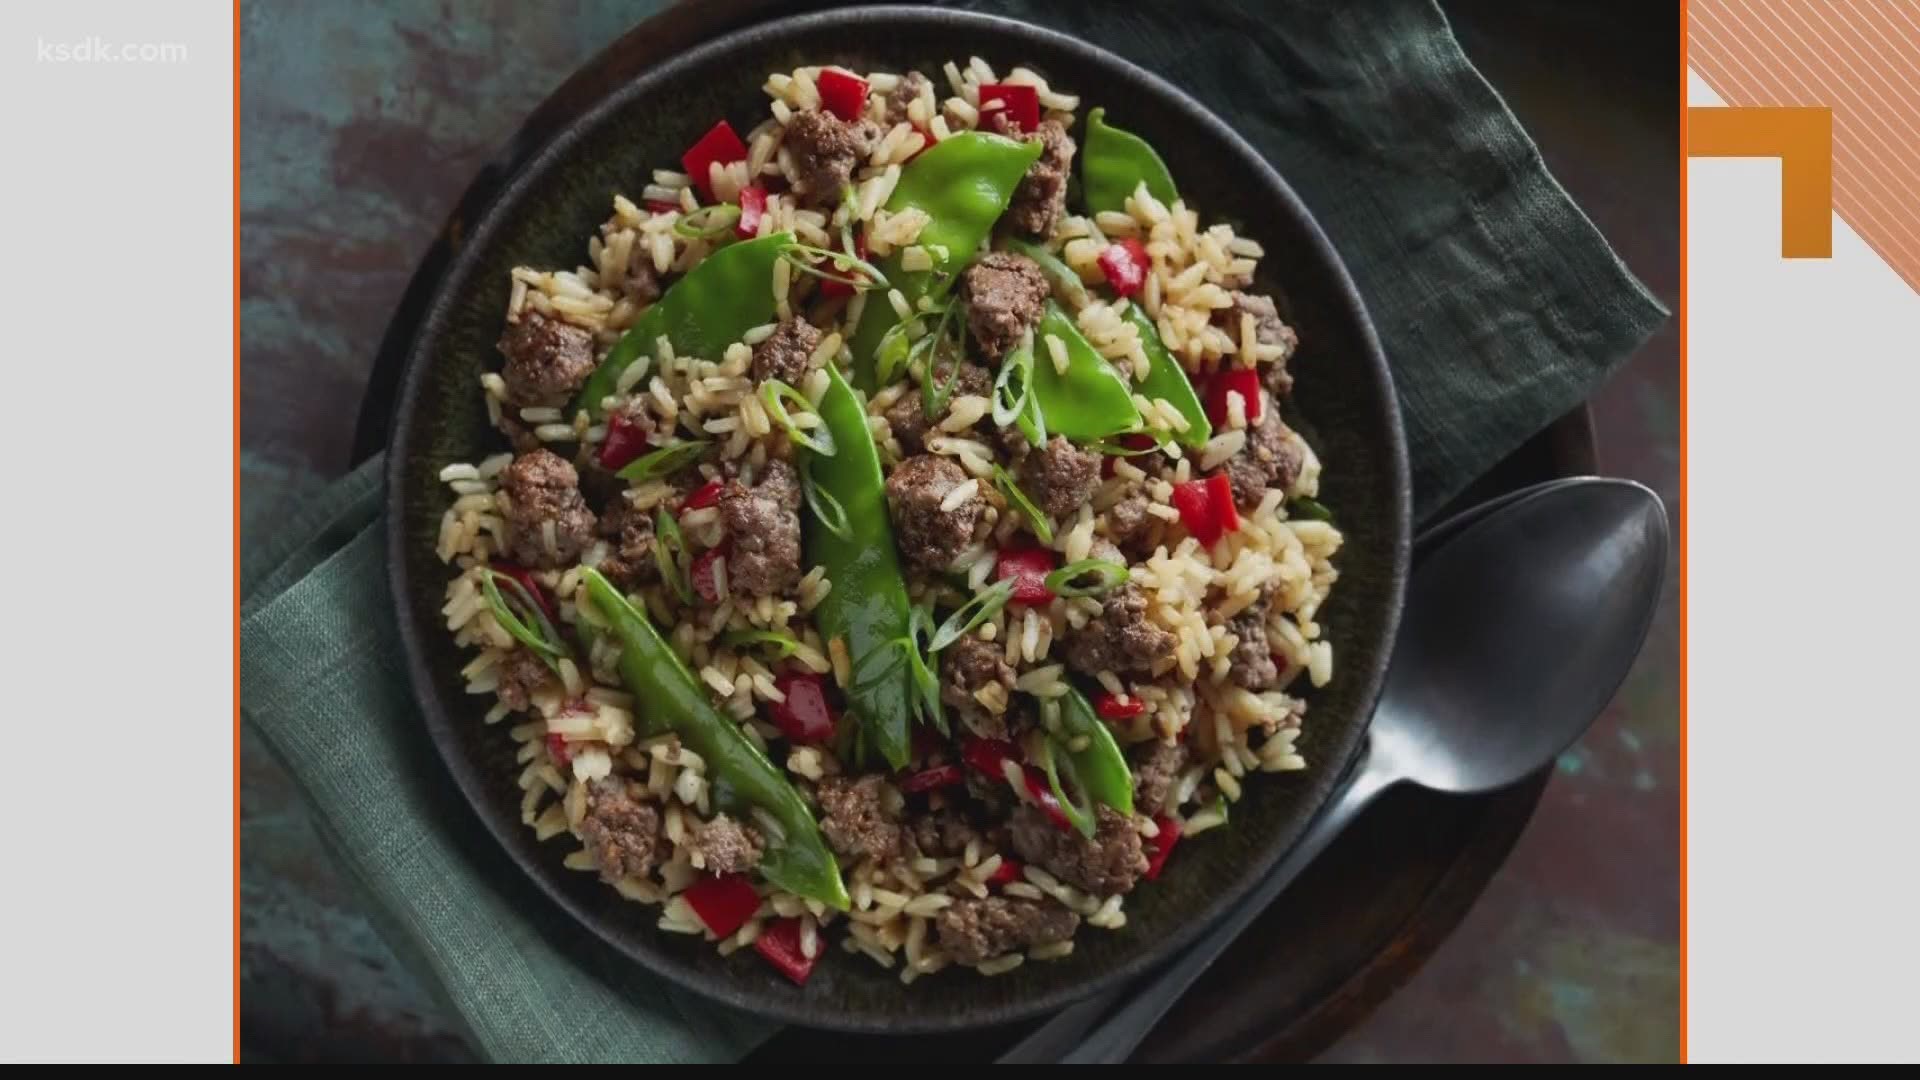 Luella Gregory of Missouri Beef Council shares a recipe for Beef & Vegetable Fried Rice.